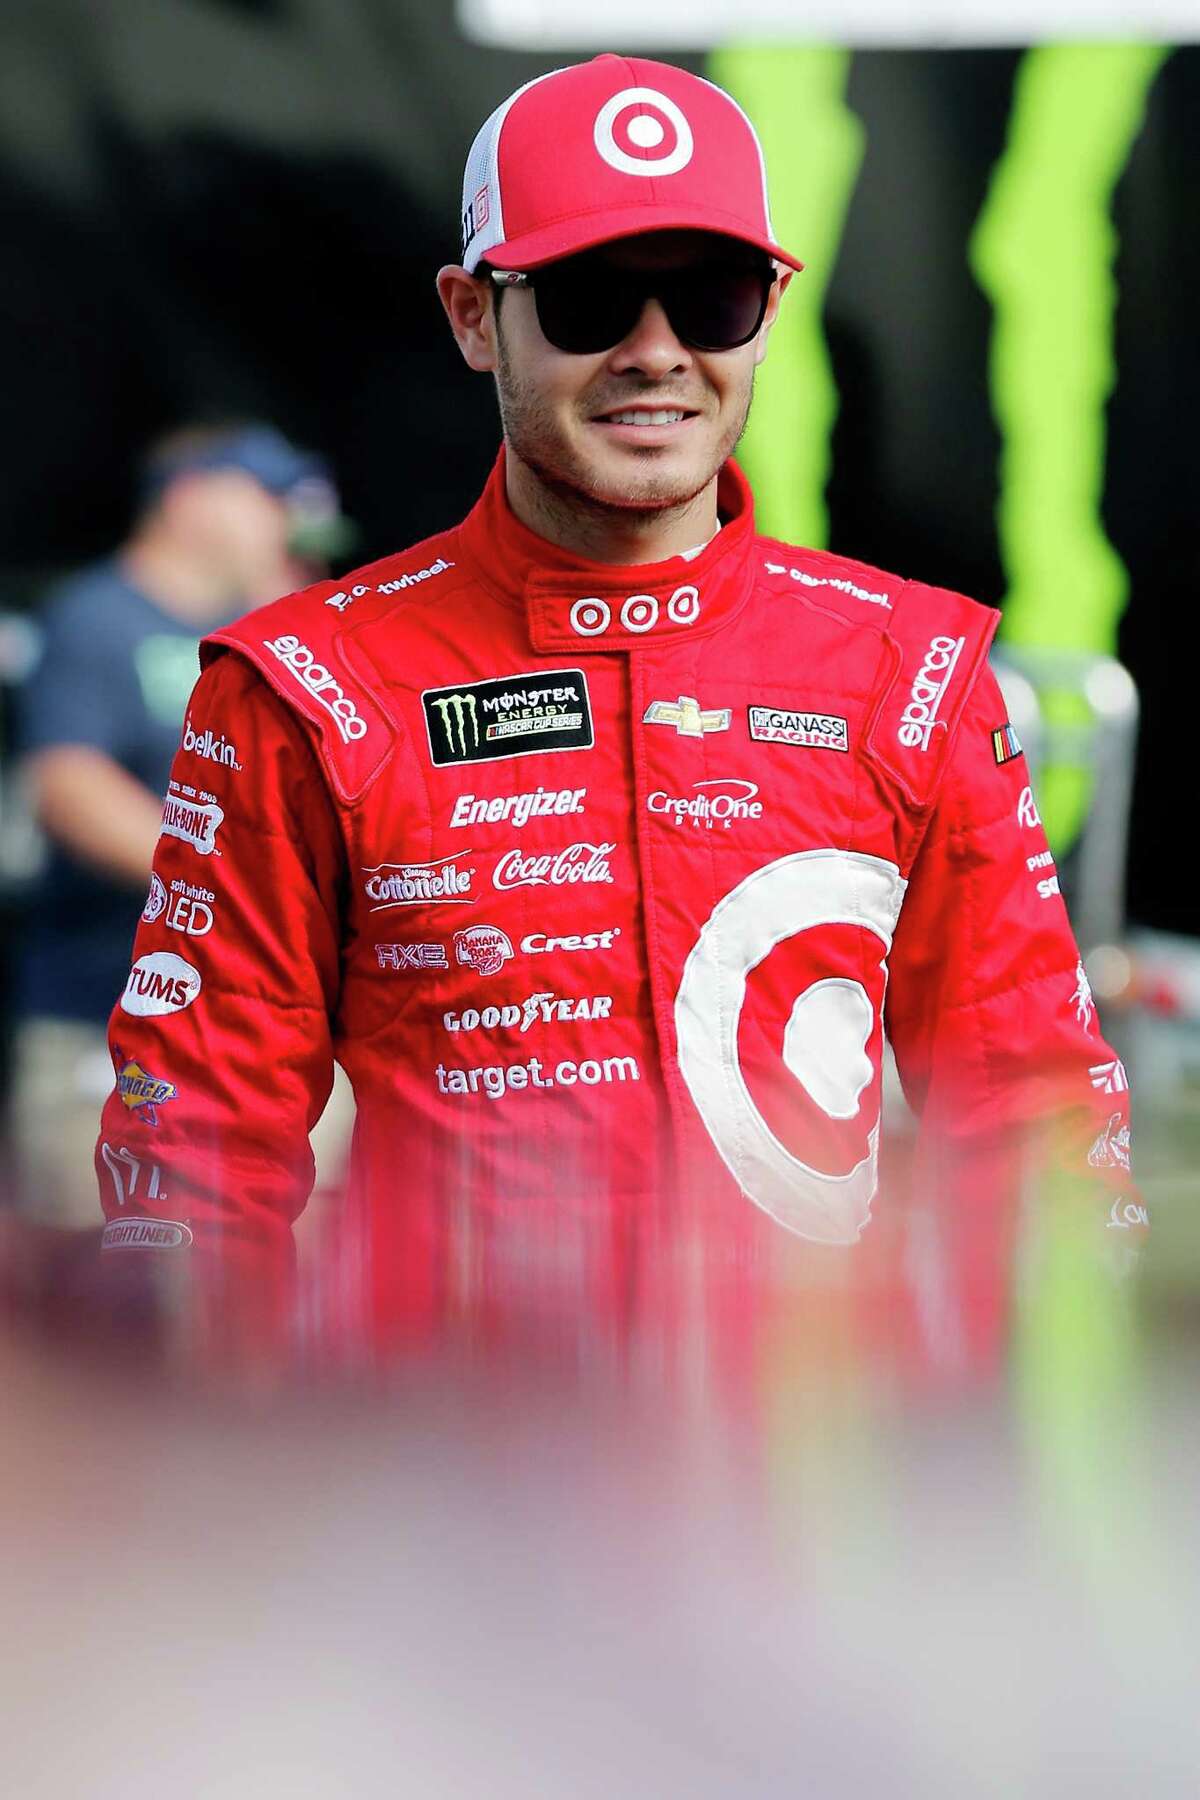 SPARTA, KENTUCKY - JULY 07: Kyle Larson, driver of the #42 Target Chevrolet, waits for the start of practice for the Monster Energy NASCAR Cup Series Quaker State 400 presented by Advance Auto Parts at Kentucky Speedway on July 7, 2017 in Sparta, Kentucky. (Photo by Brian Lawdermilk/Getty Images) ORG XMIT: 775002027